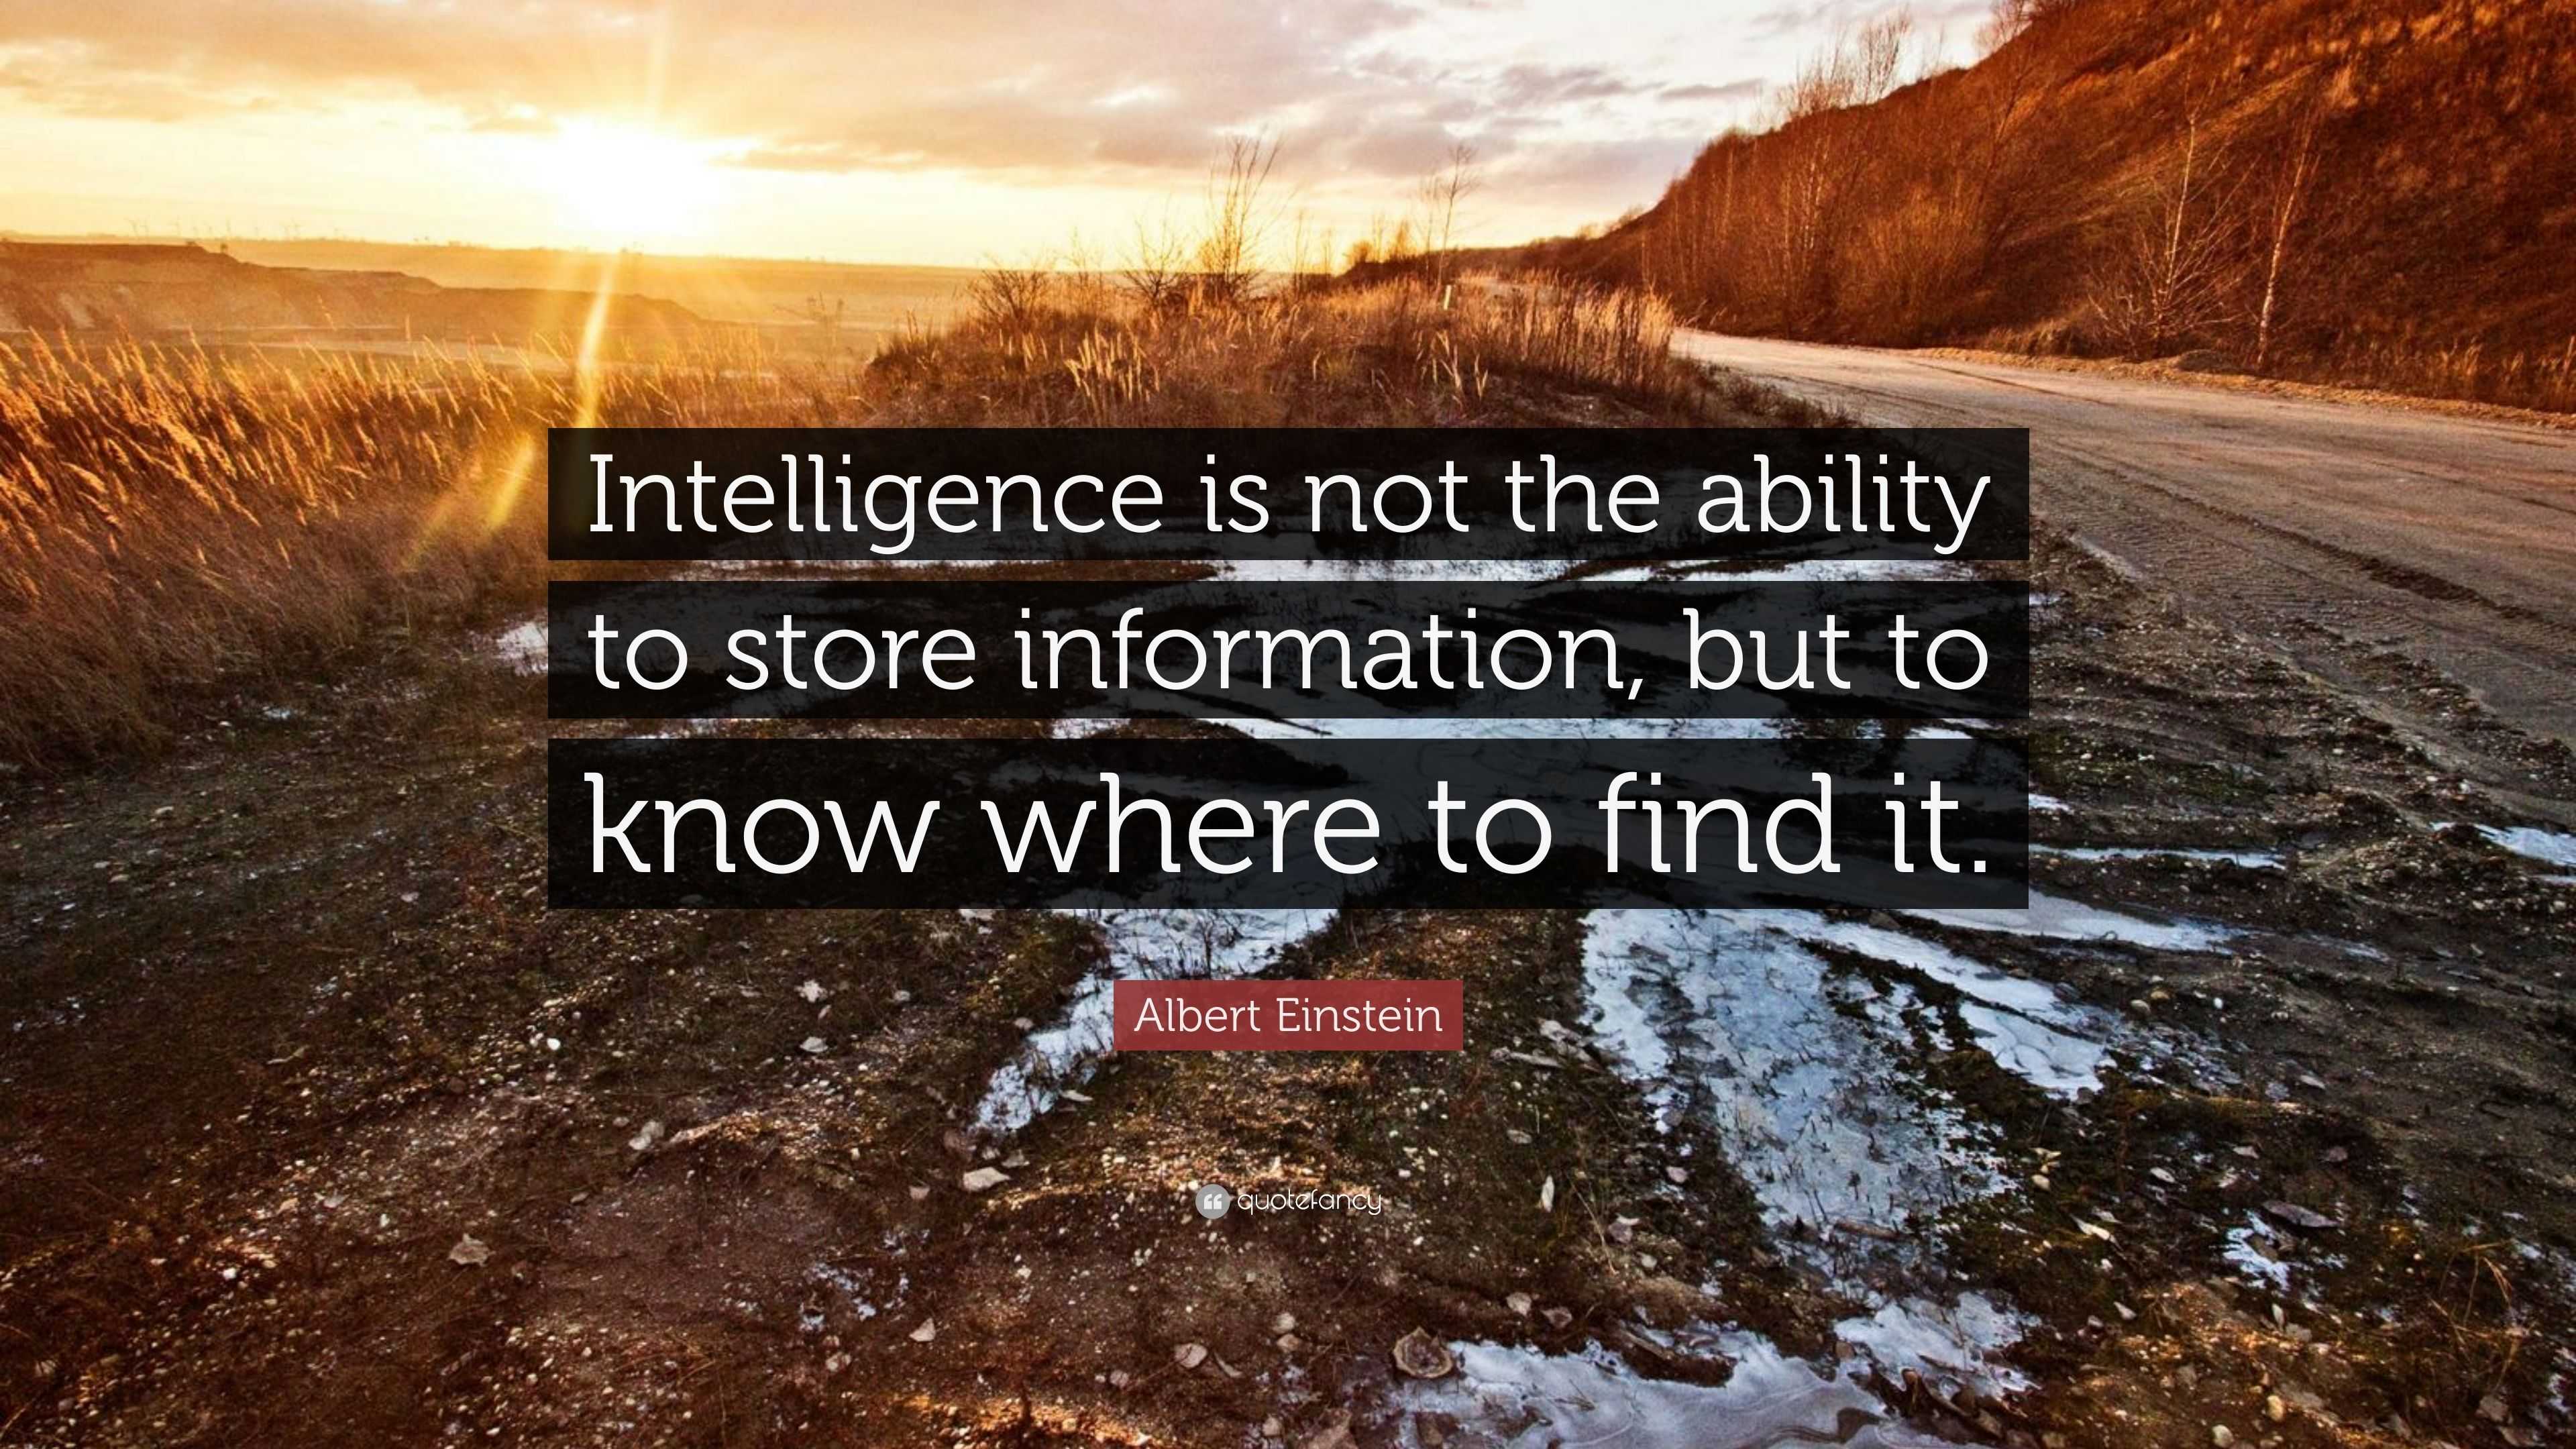 Albert Einstein Quote: “Intelligence is not the ability to store